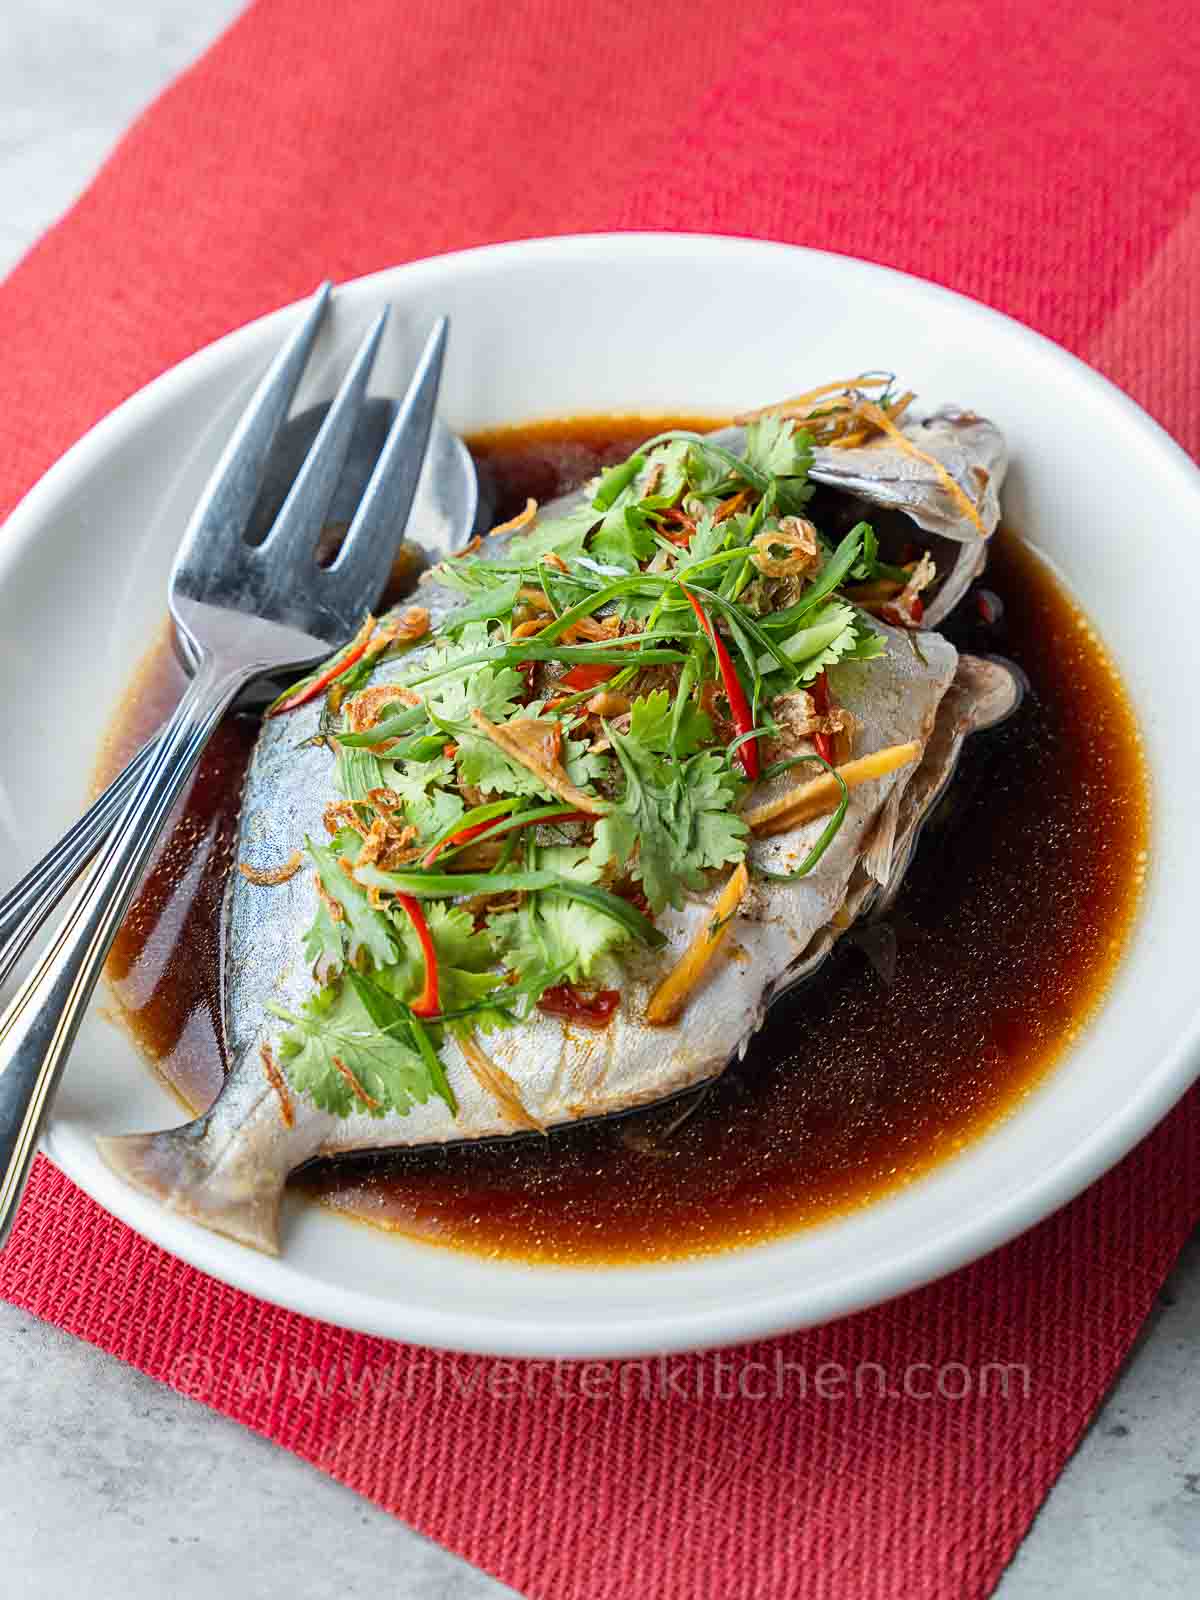 Steamed Fish made of pompano or pomfret with Chinese sauce